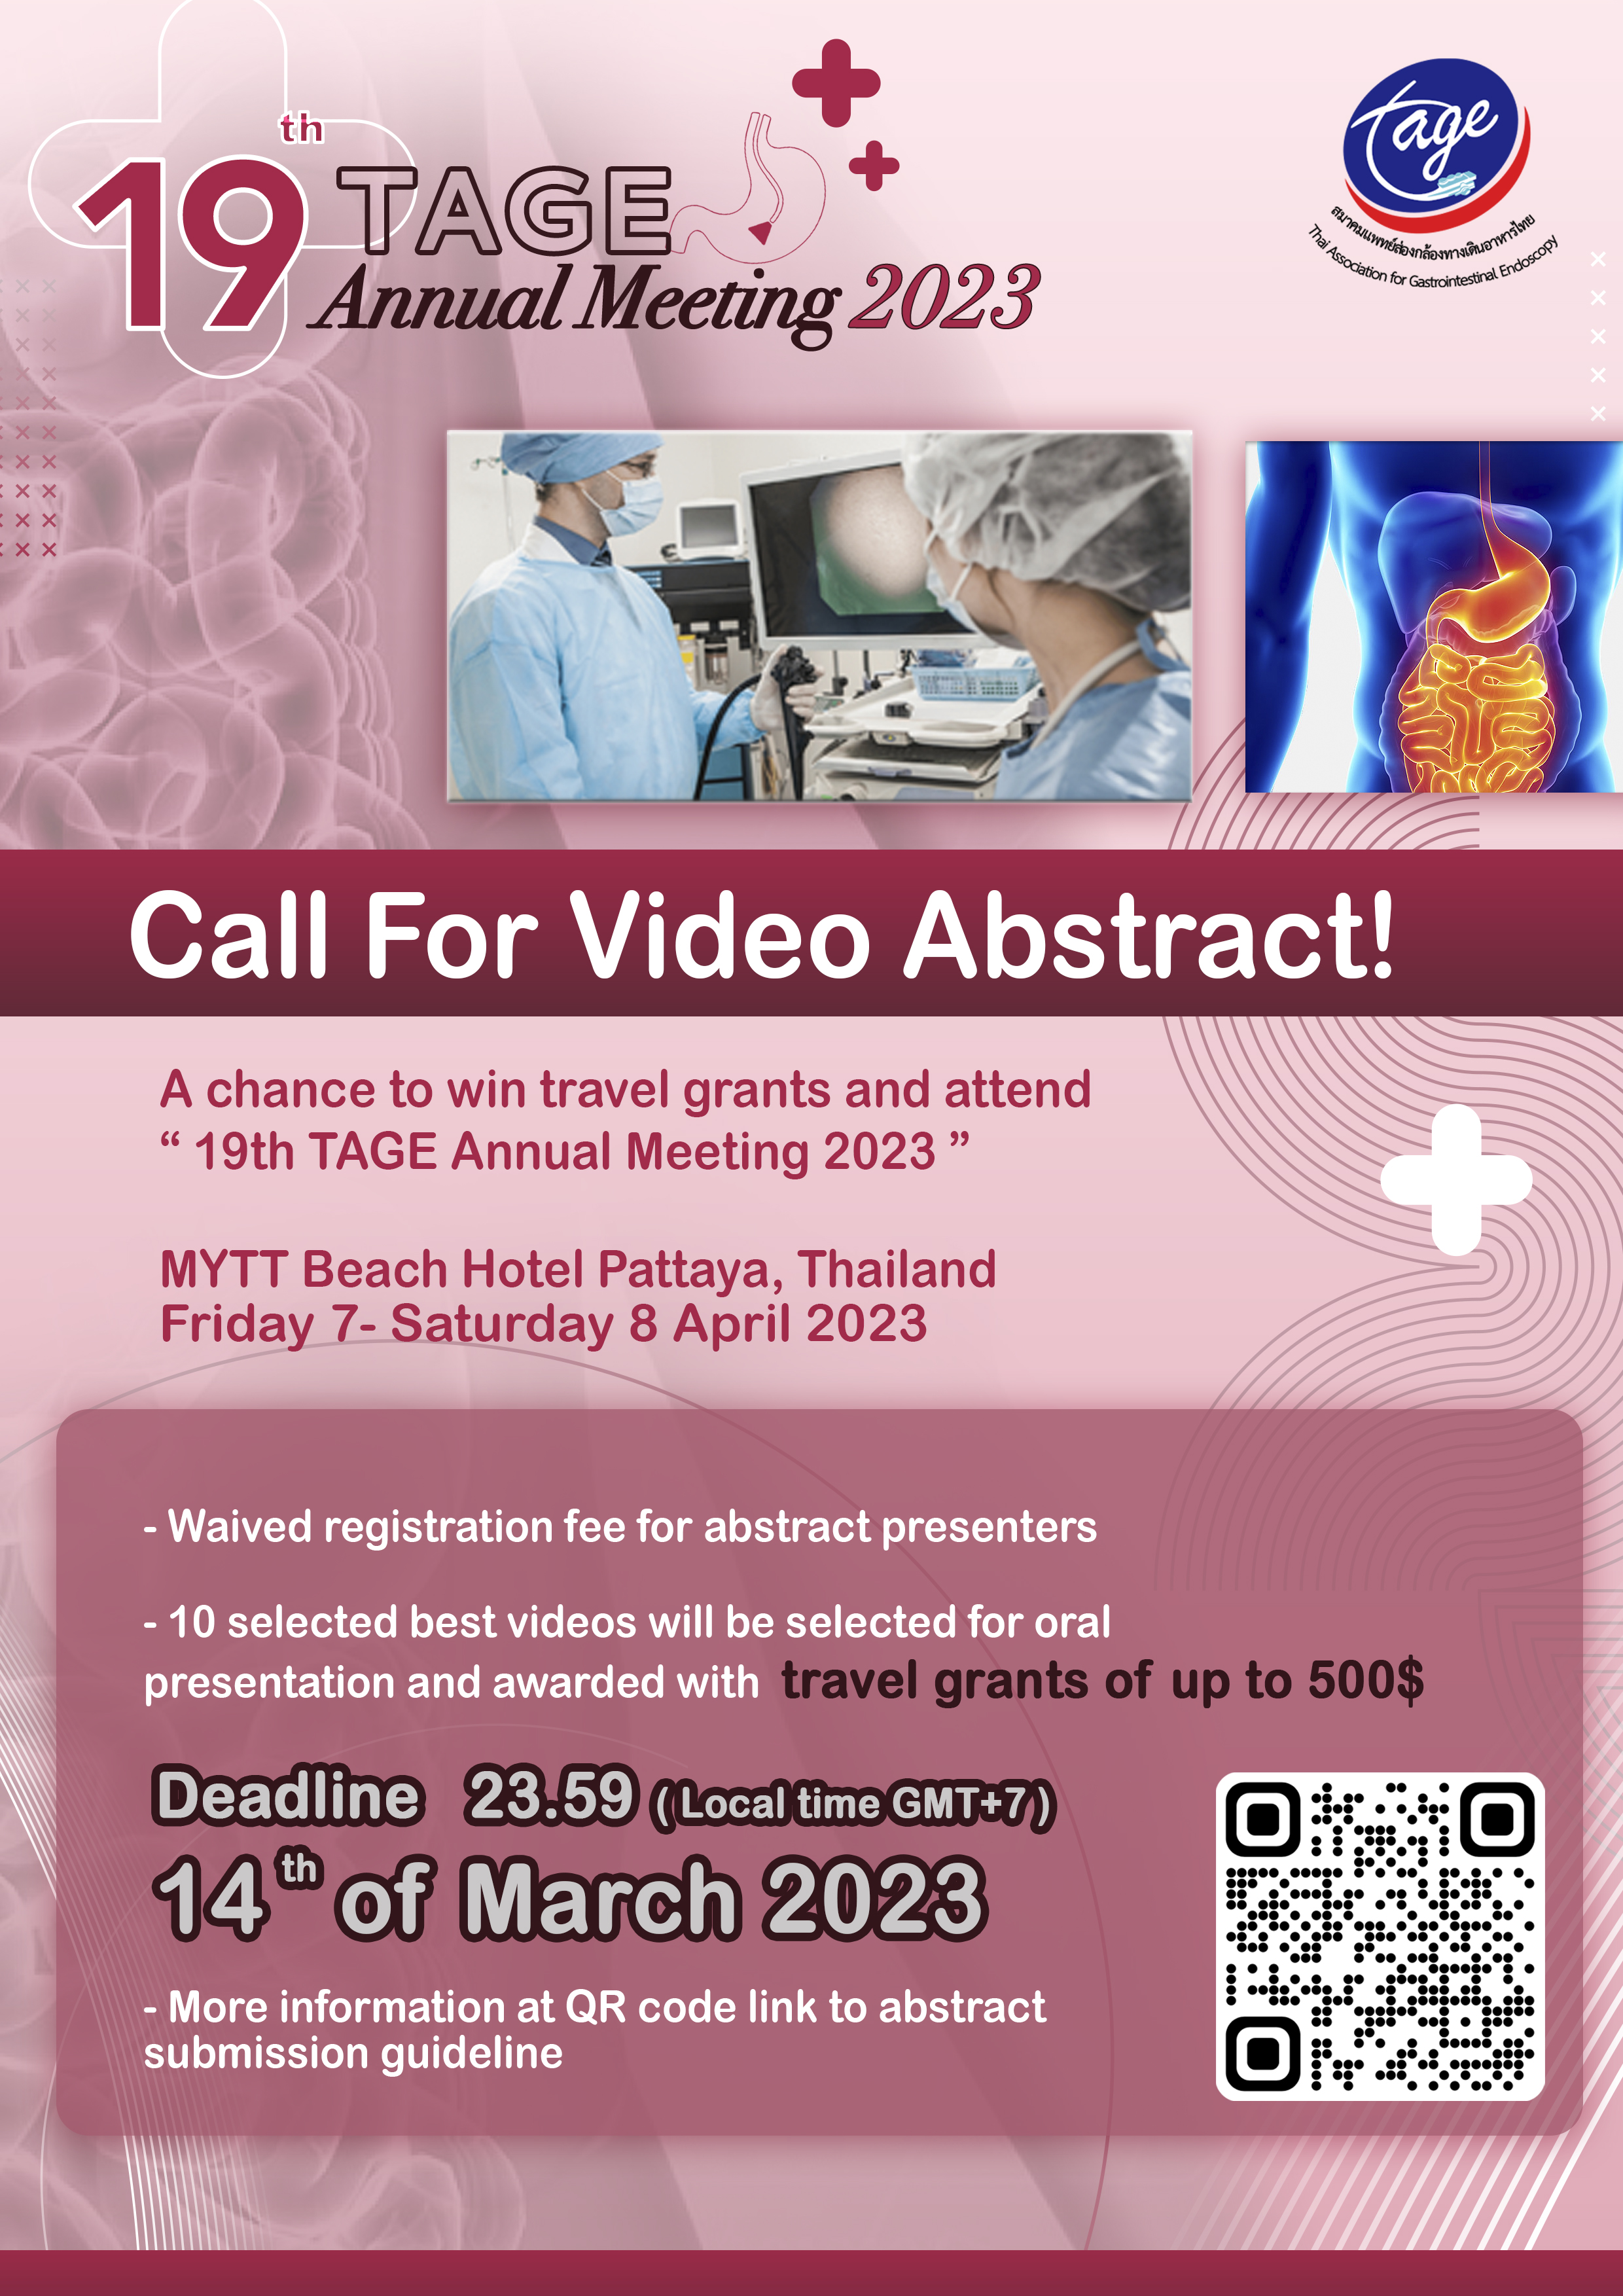 TAGE Annual Meeting 2023 : Call For Video Abstract!